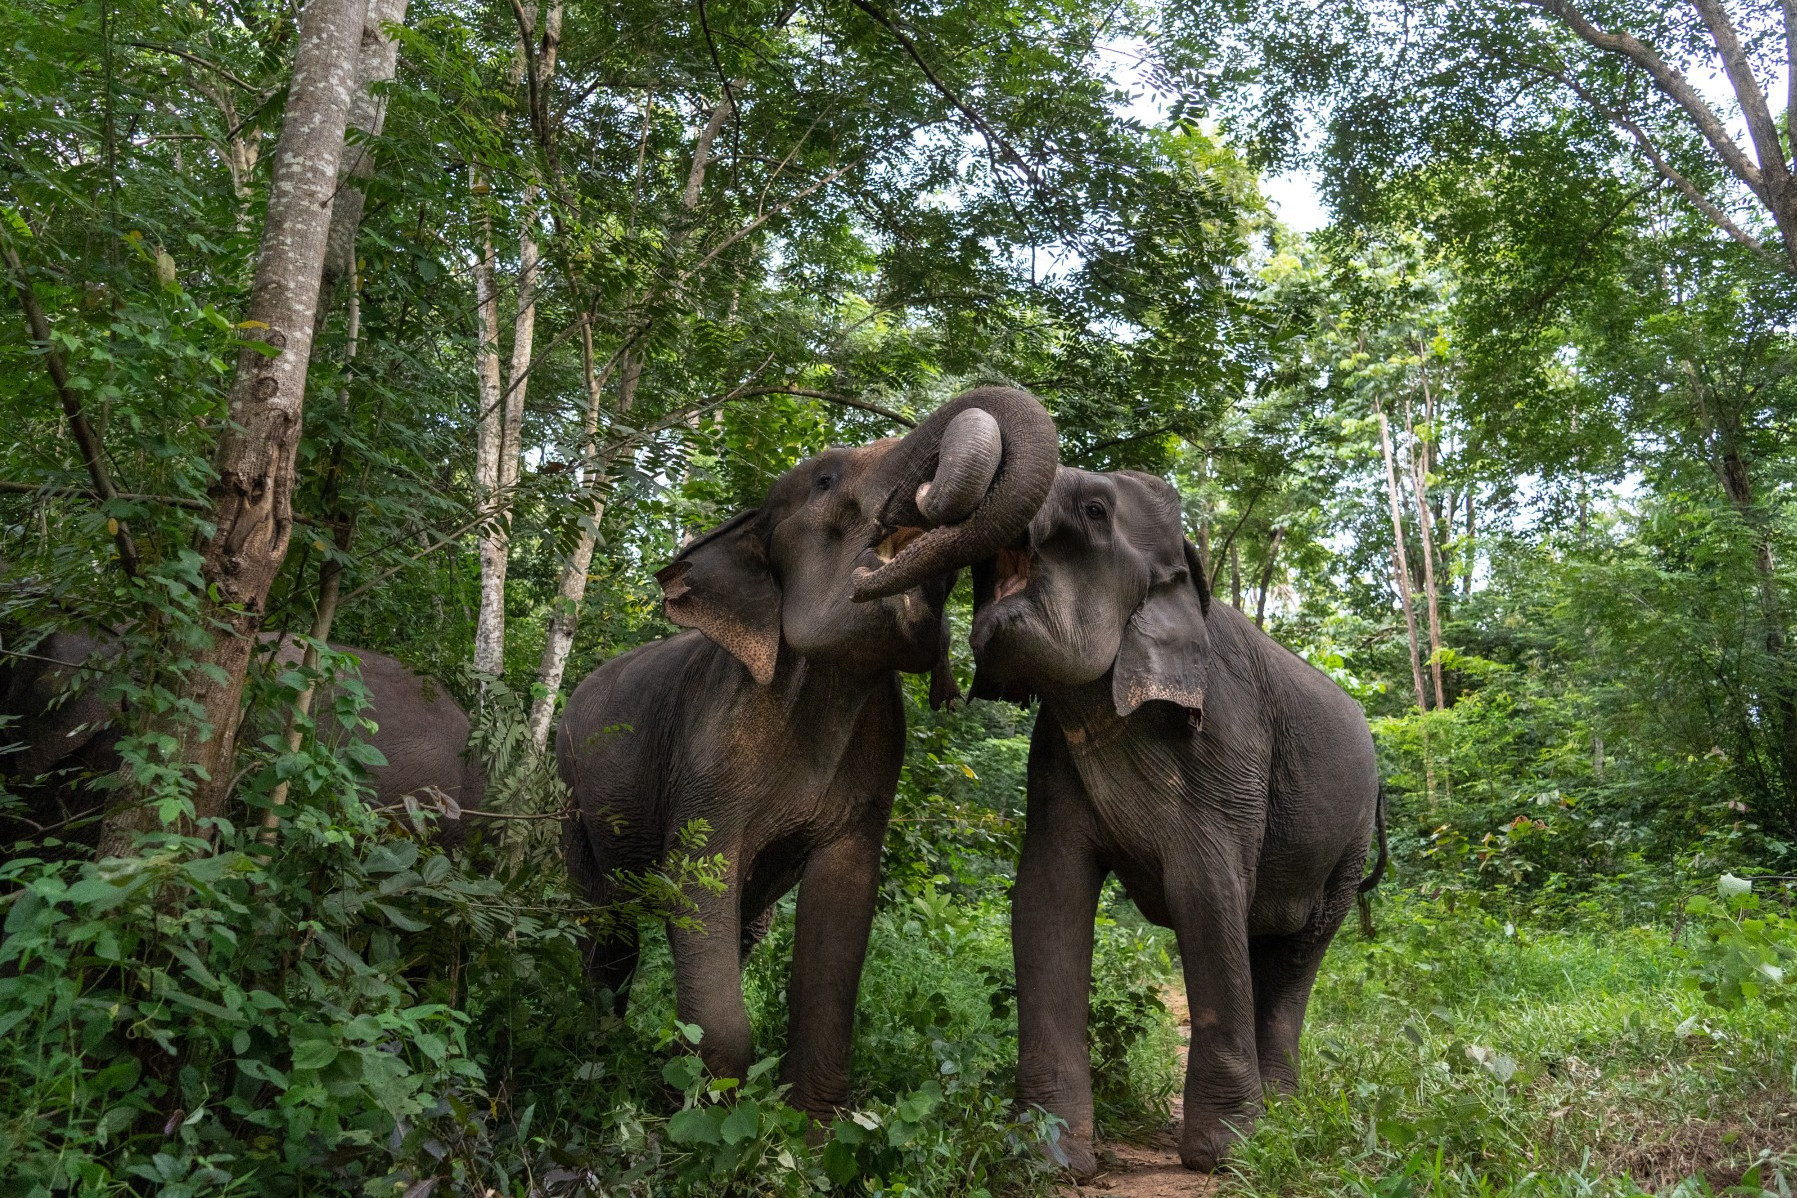 Two elephants in the wild with their trunks intertwined